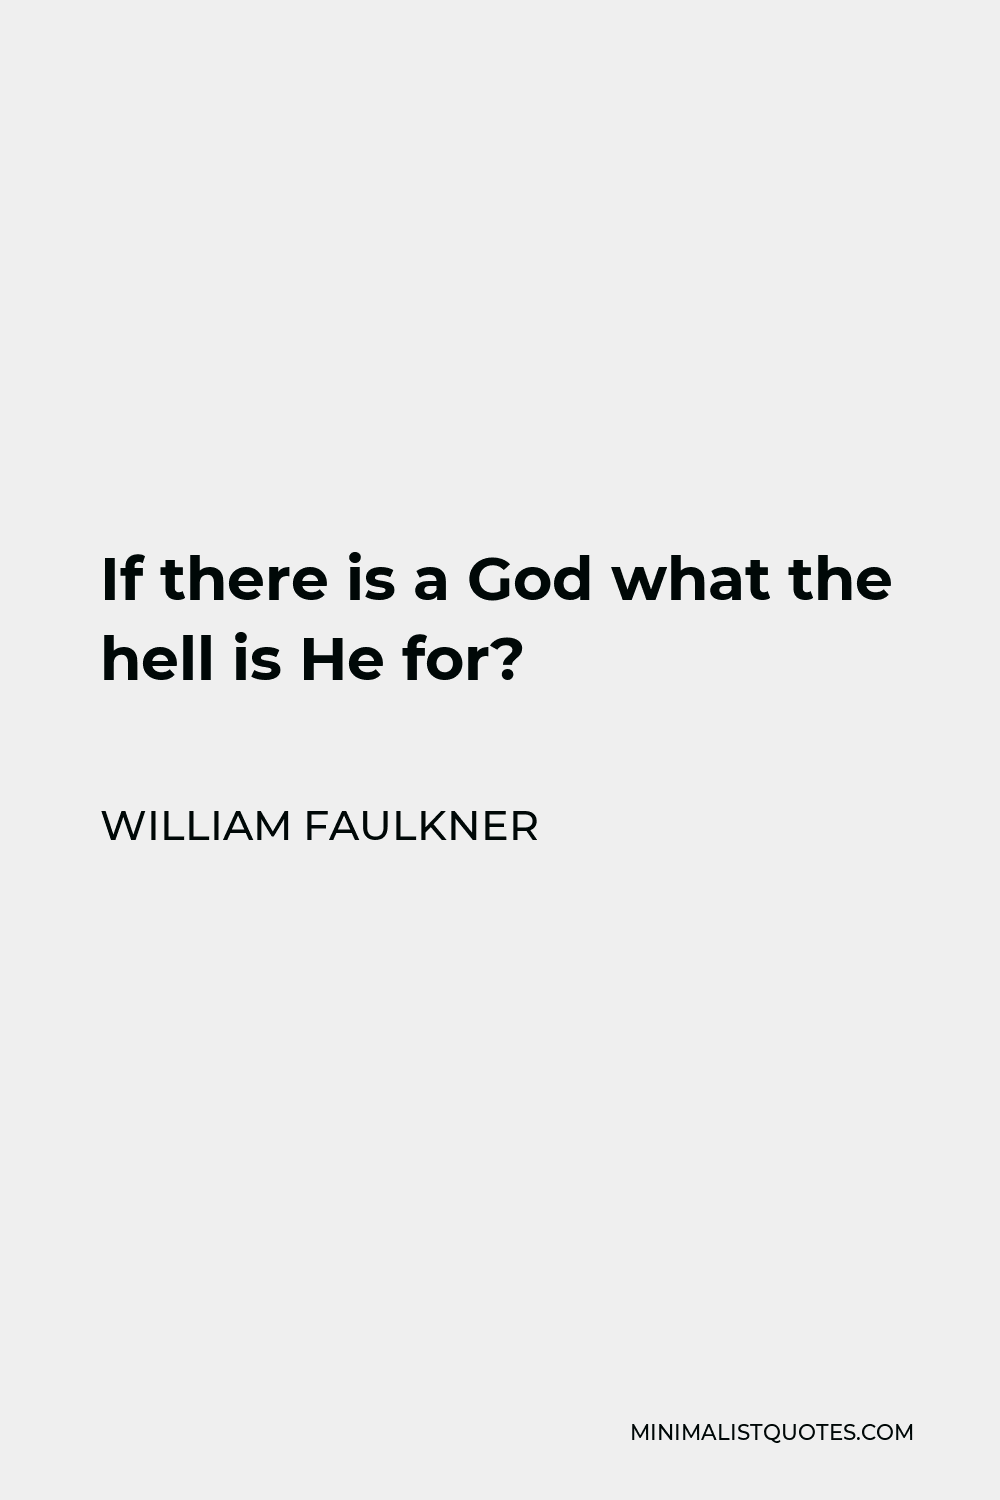 William Faulkner Quote - If there is a God what the hell is He for?